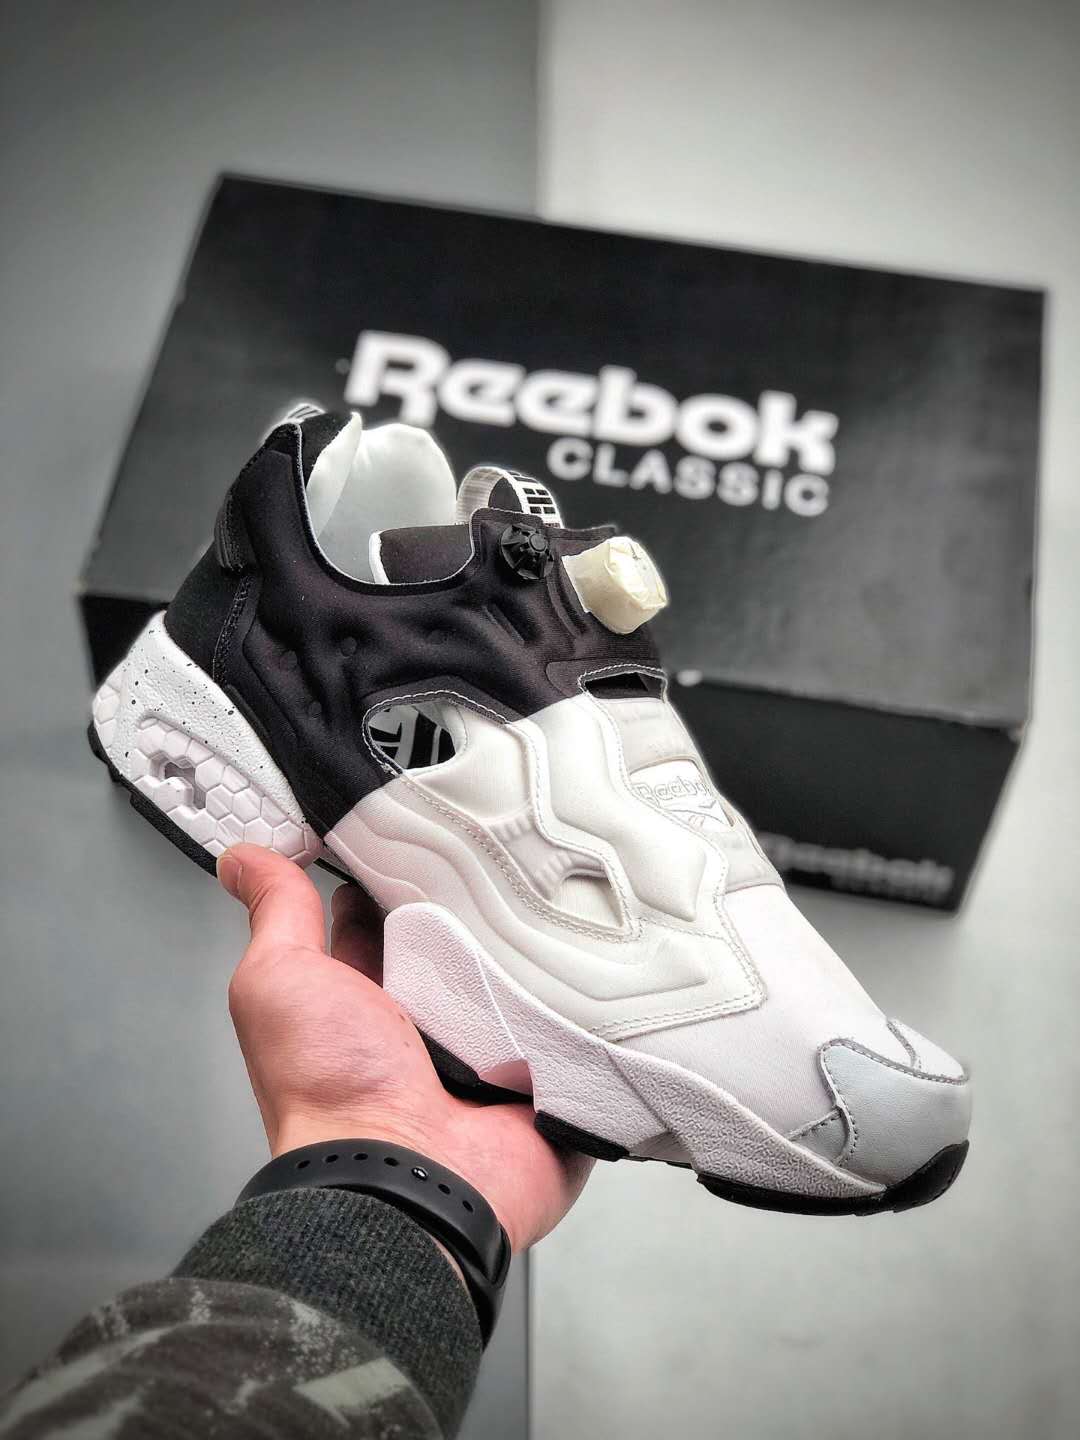 Reebok Instapump Fury BS5649 - Unmatched Style and Comfort